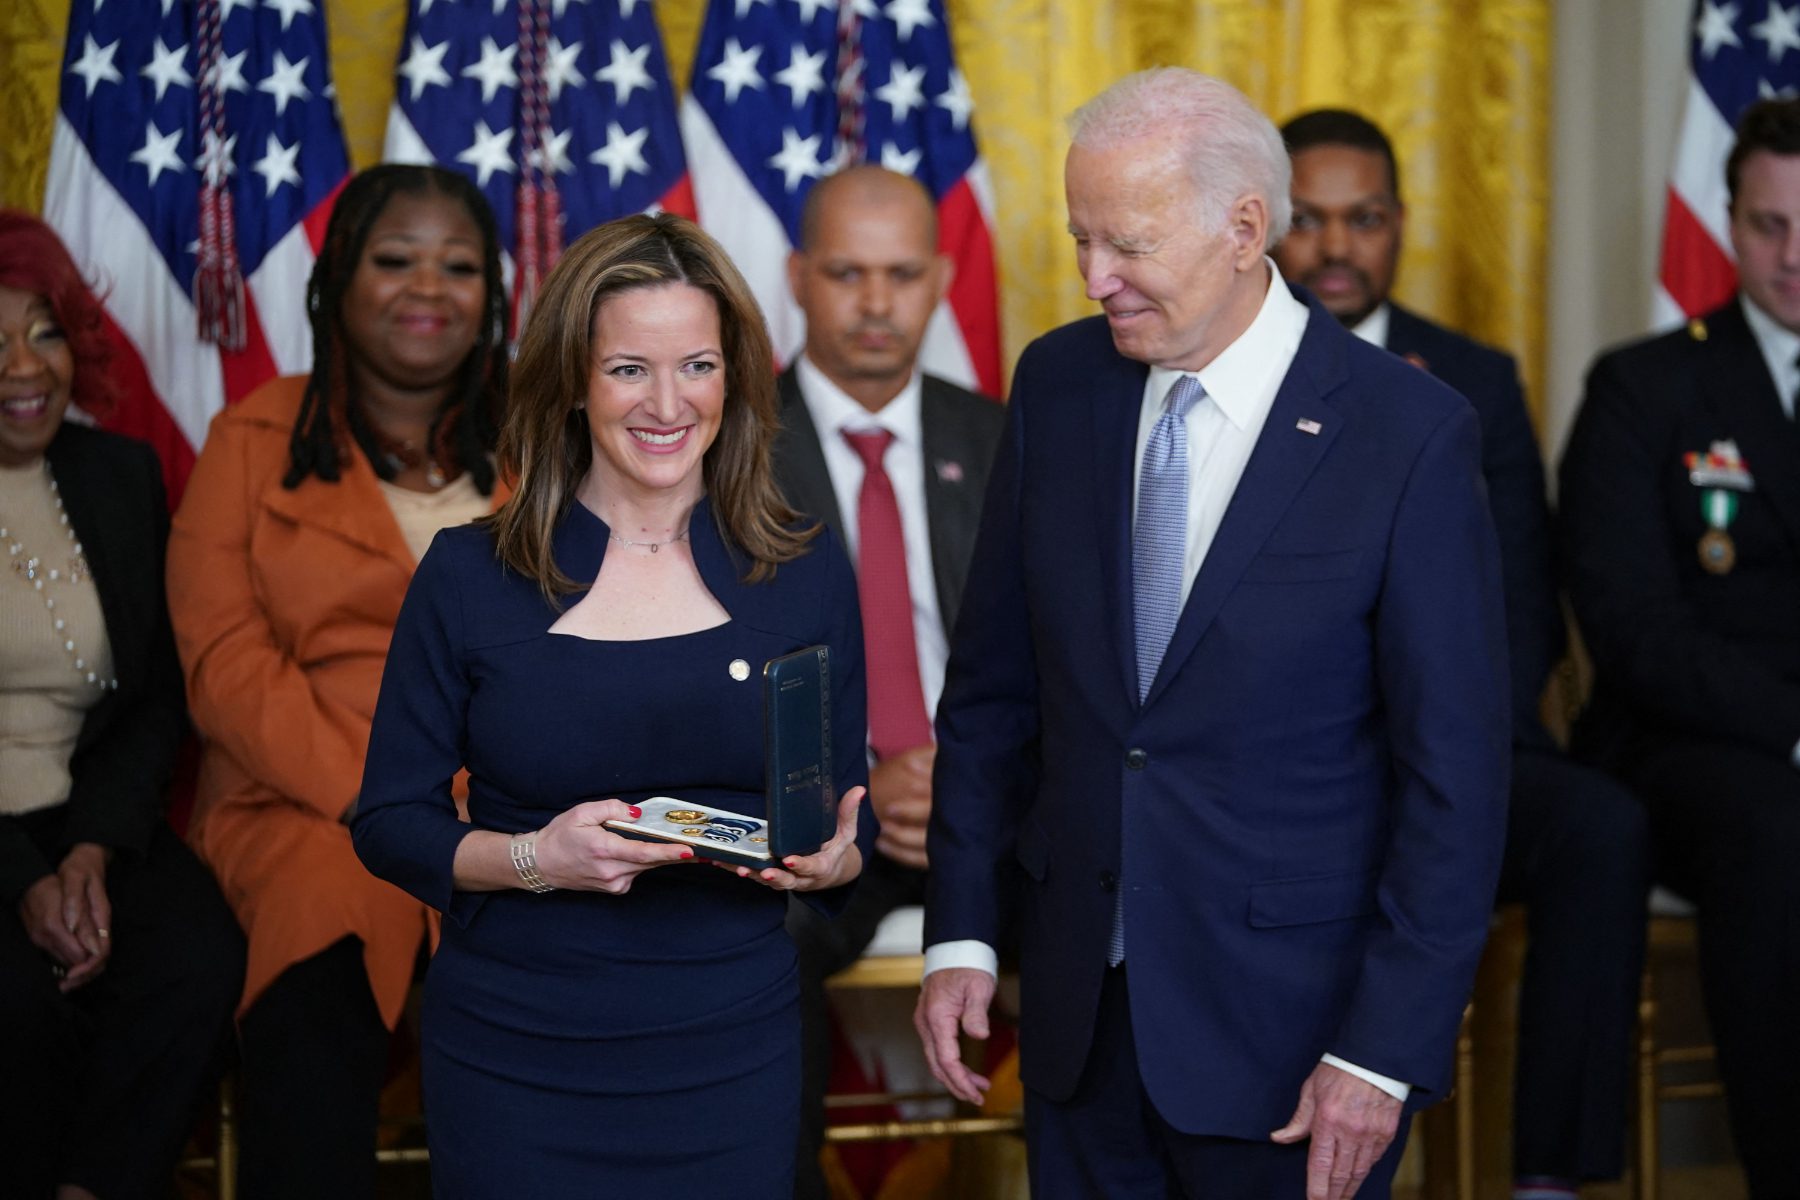 Jocelyn Benson, Michigan's secretary of state, receives the Presidential Citizens Medal from President Joe Biden for upholding the results of the 2020 presidential election despite pressure from President Donald Trump